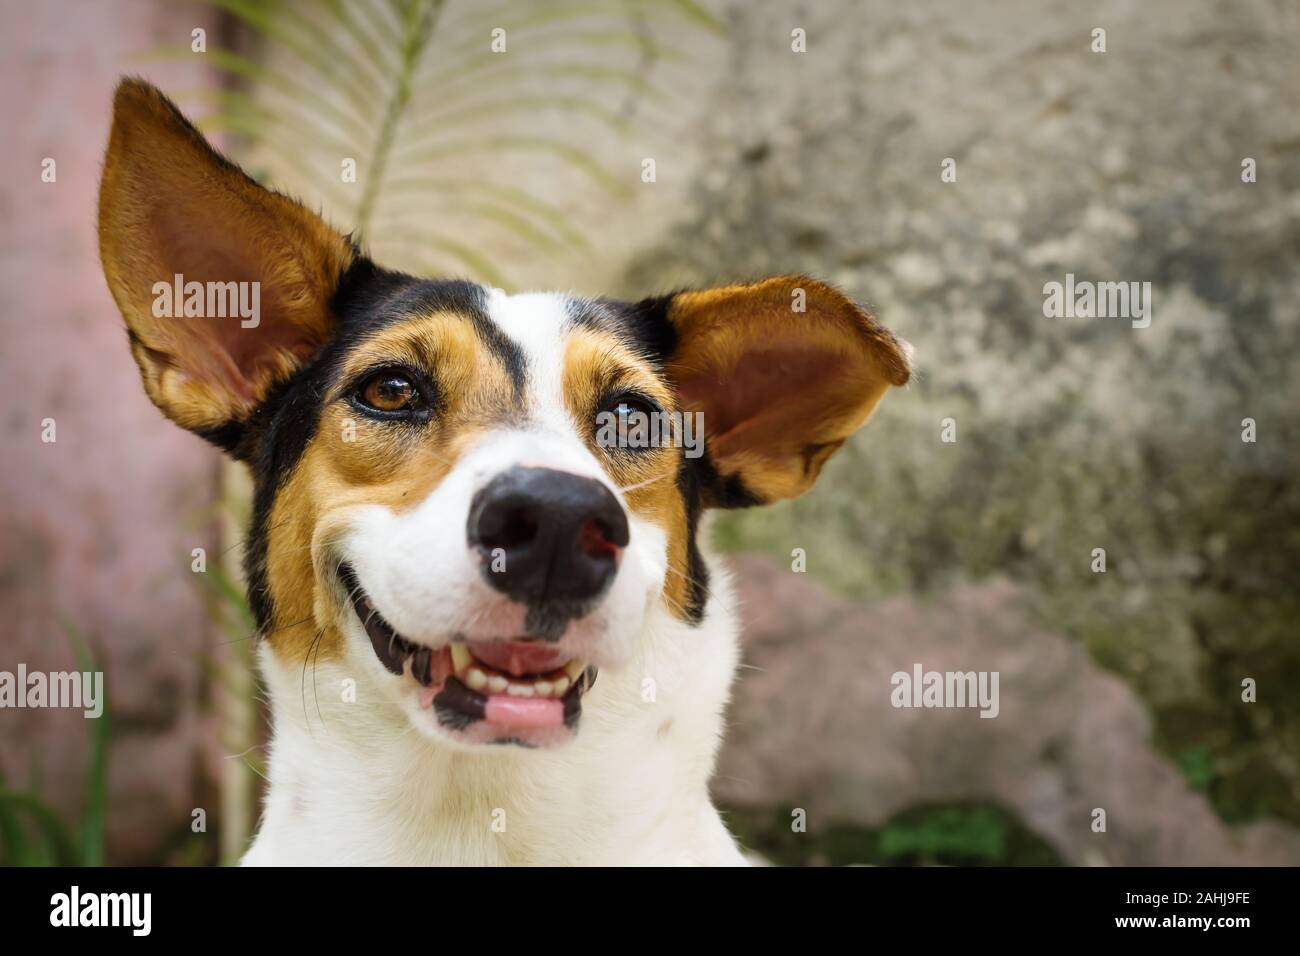 Smiling dog with white, orange and black spots lying in natural garden Stock Photo